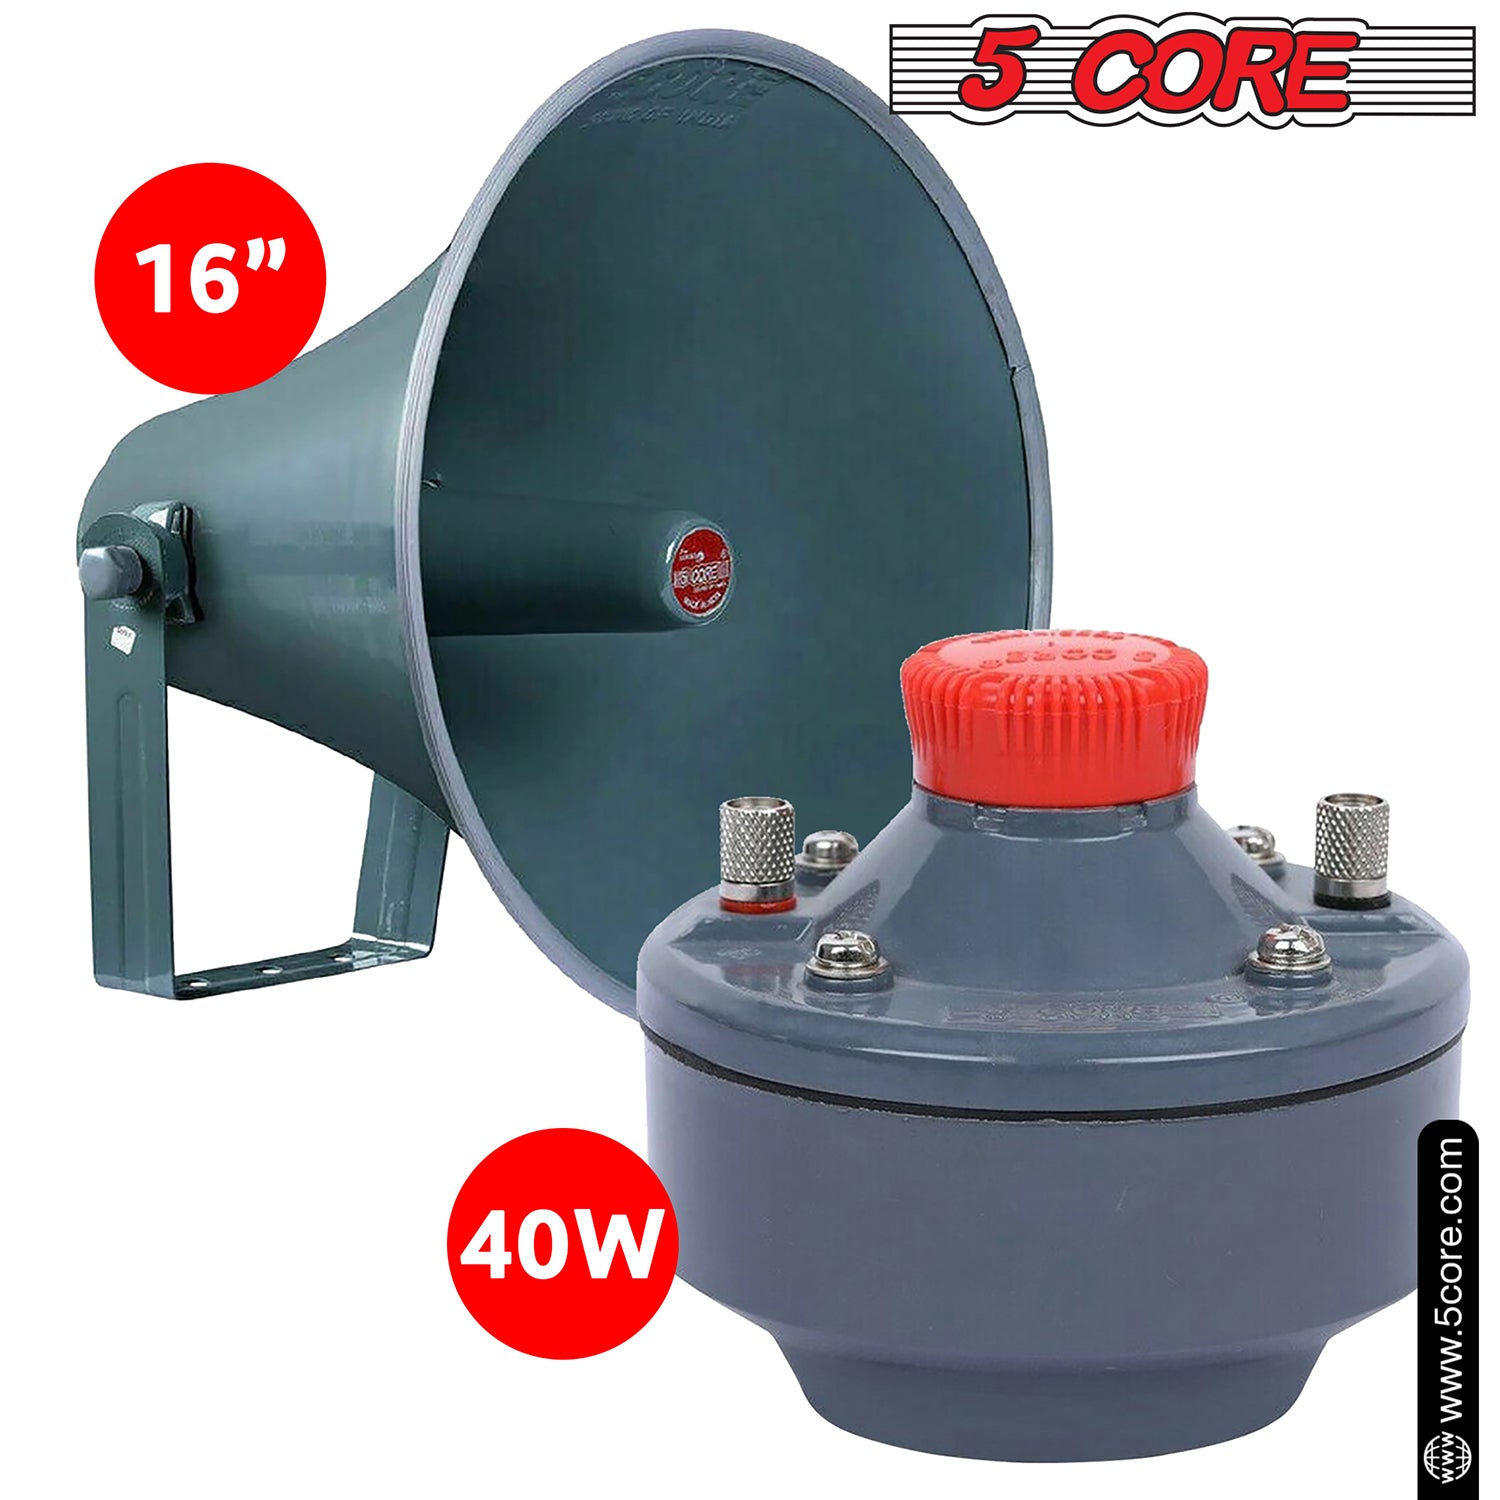 5 Core PA Horn Speaker  400W PMPO Compression Driver in 16 Inch Throat  Mounting Bracket Included